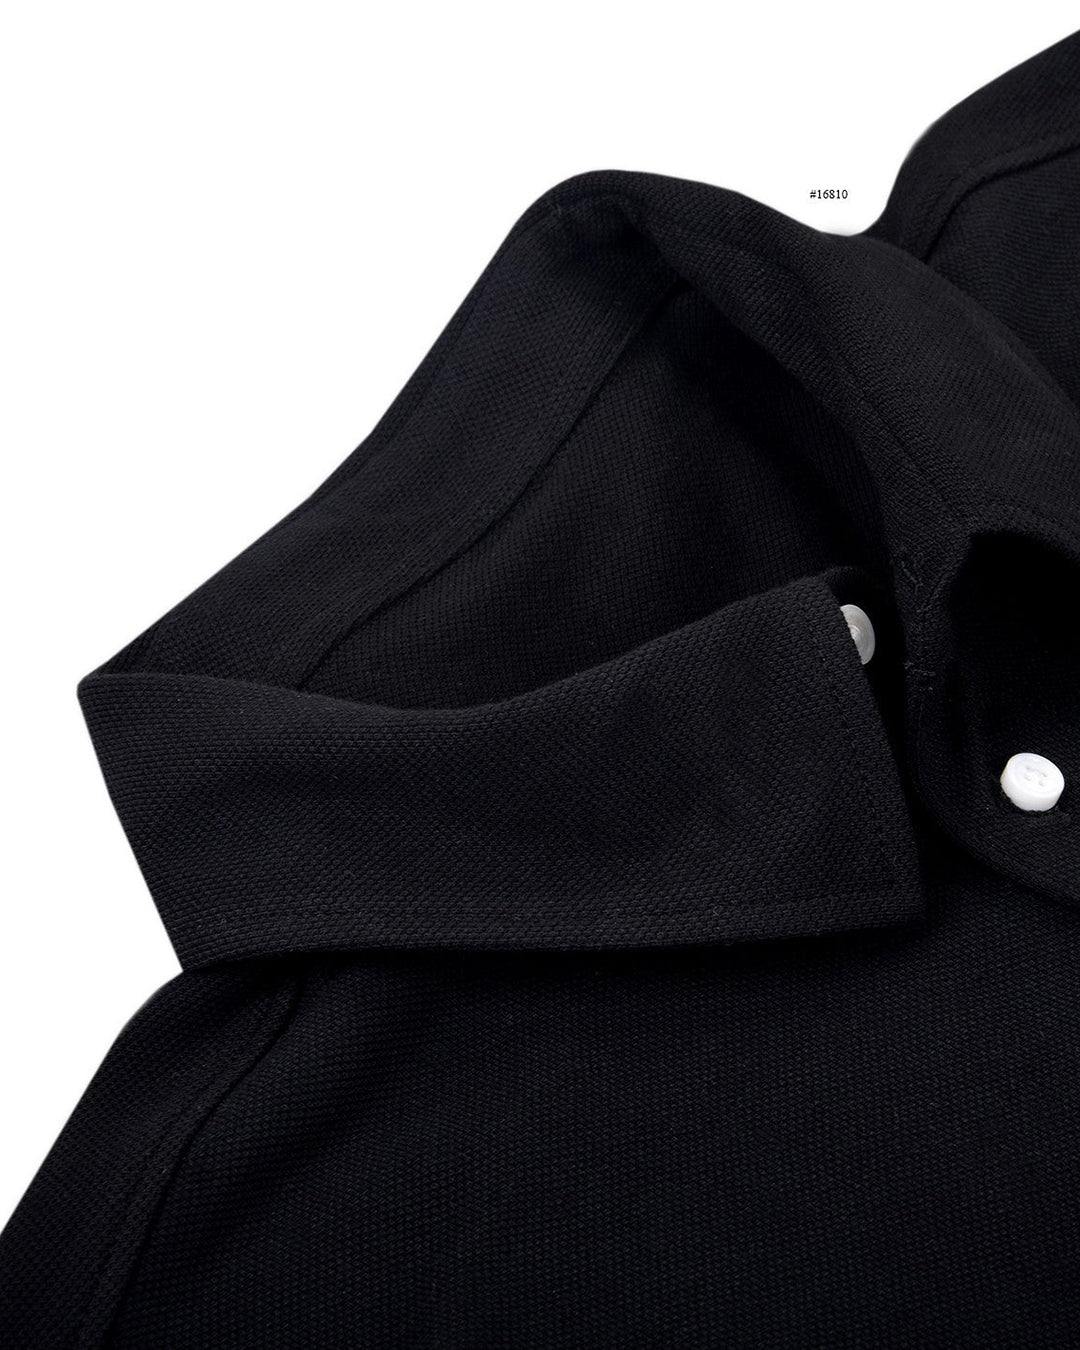 Collar close up of the custom oxford polo shirt for men by Luxire in soft black